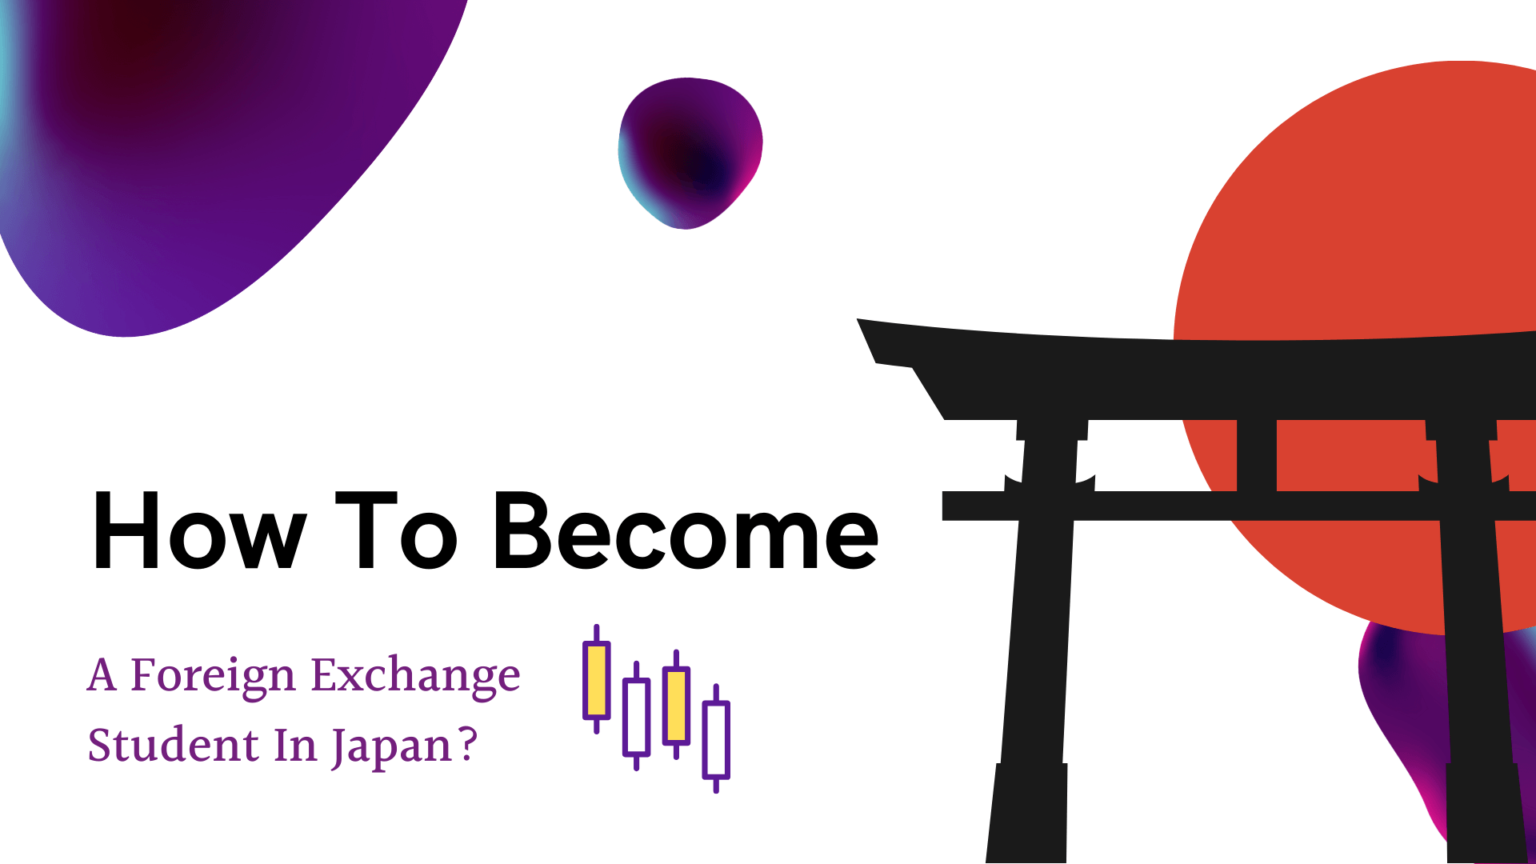 How To Become A Foreign Exchange Student In Japan